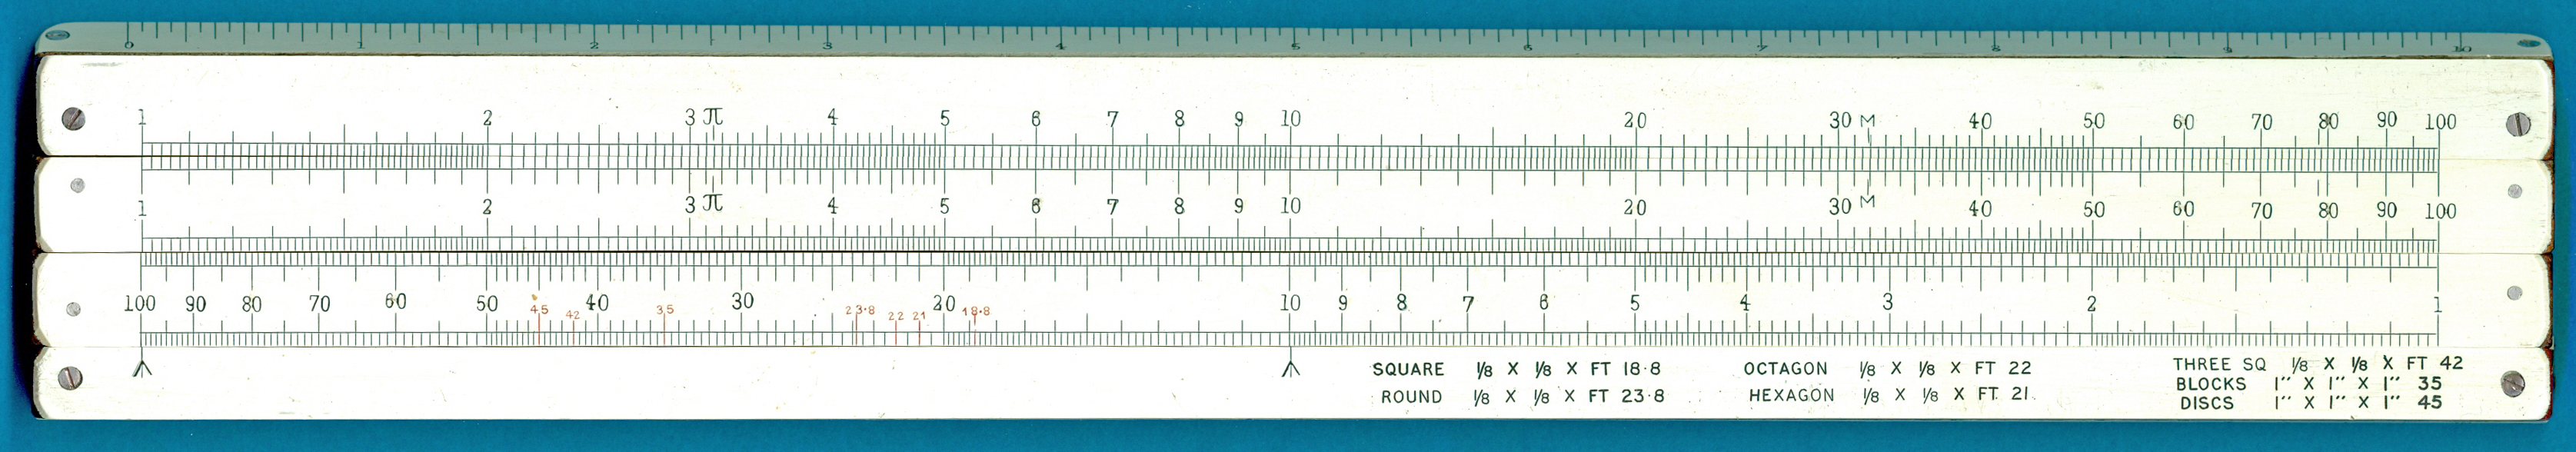 Thornton A.G. / P.I.C. / British A.G. NoName Poly-slide (2) Steel Weight Calculator